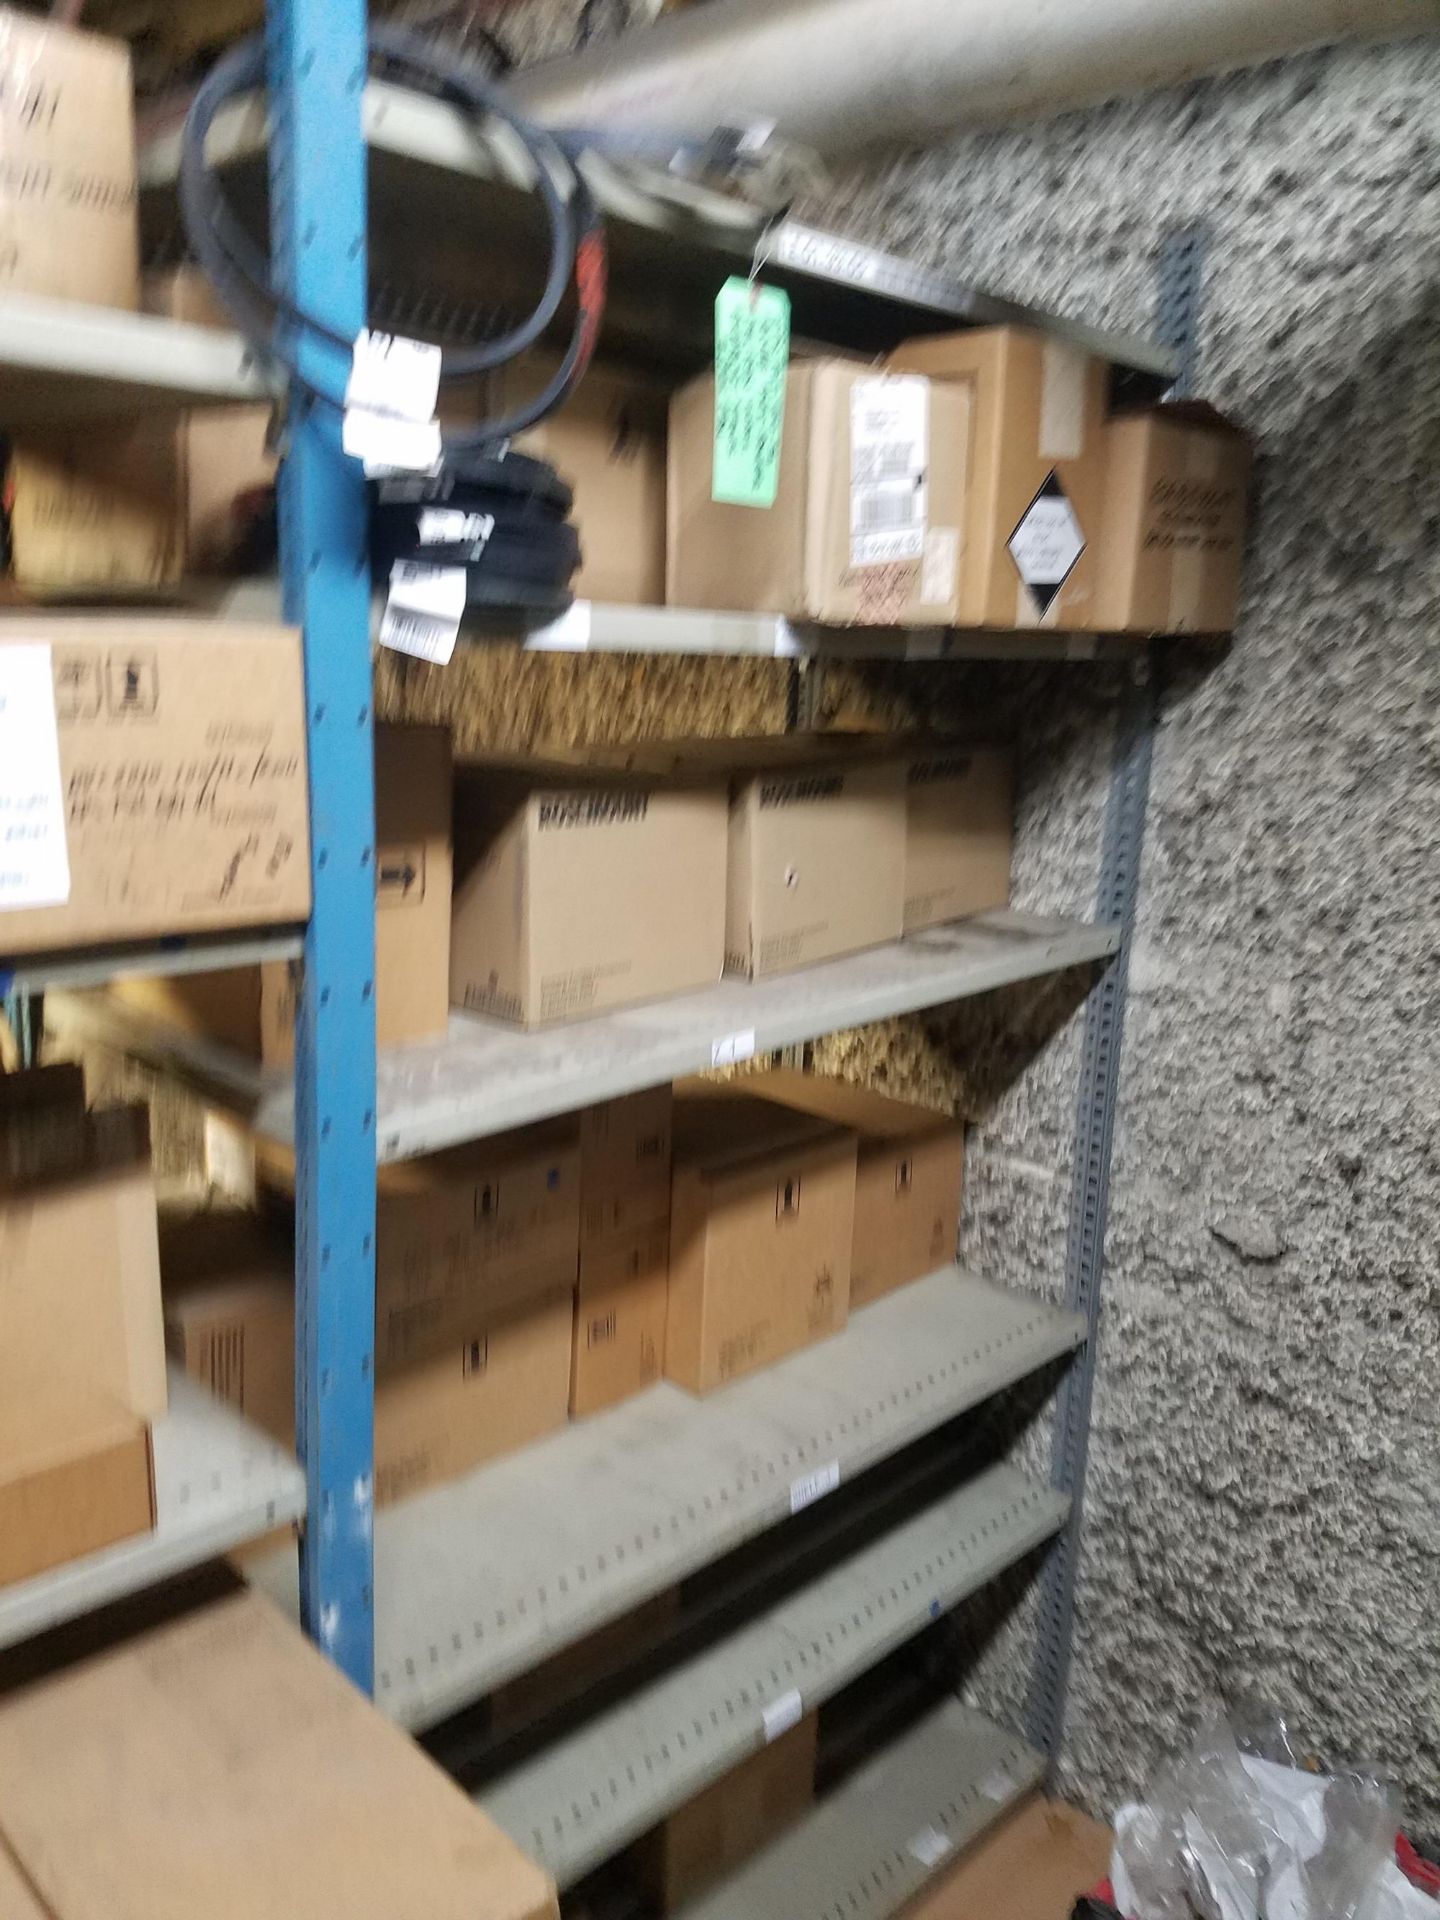 Contents of Spare Parts Storage Area On Mezzanine | Rig Fee: $400 - Image 9 of 19